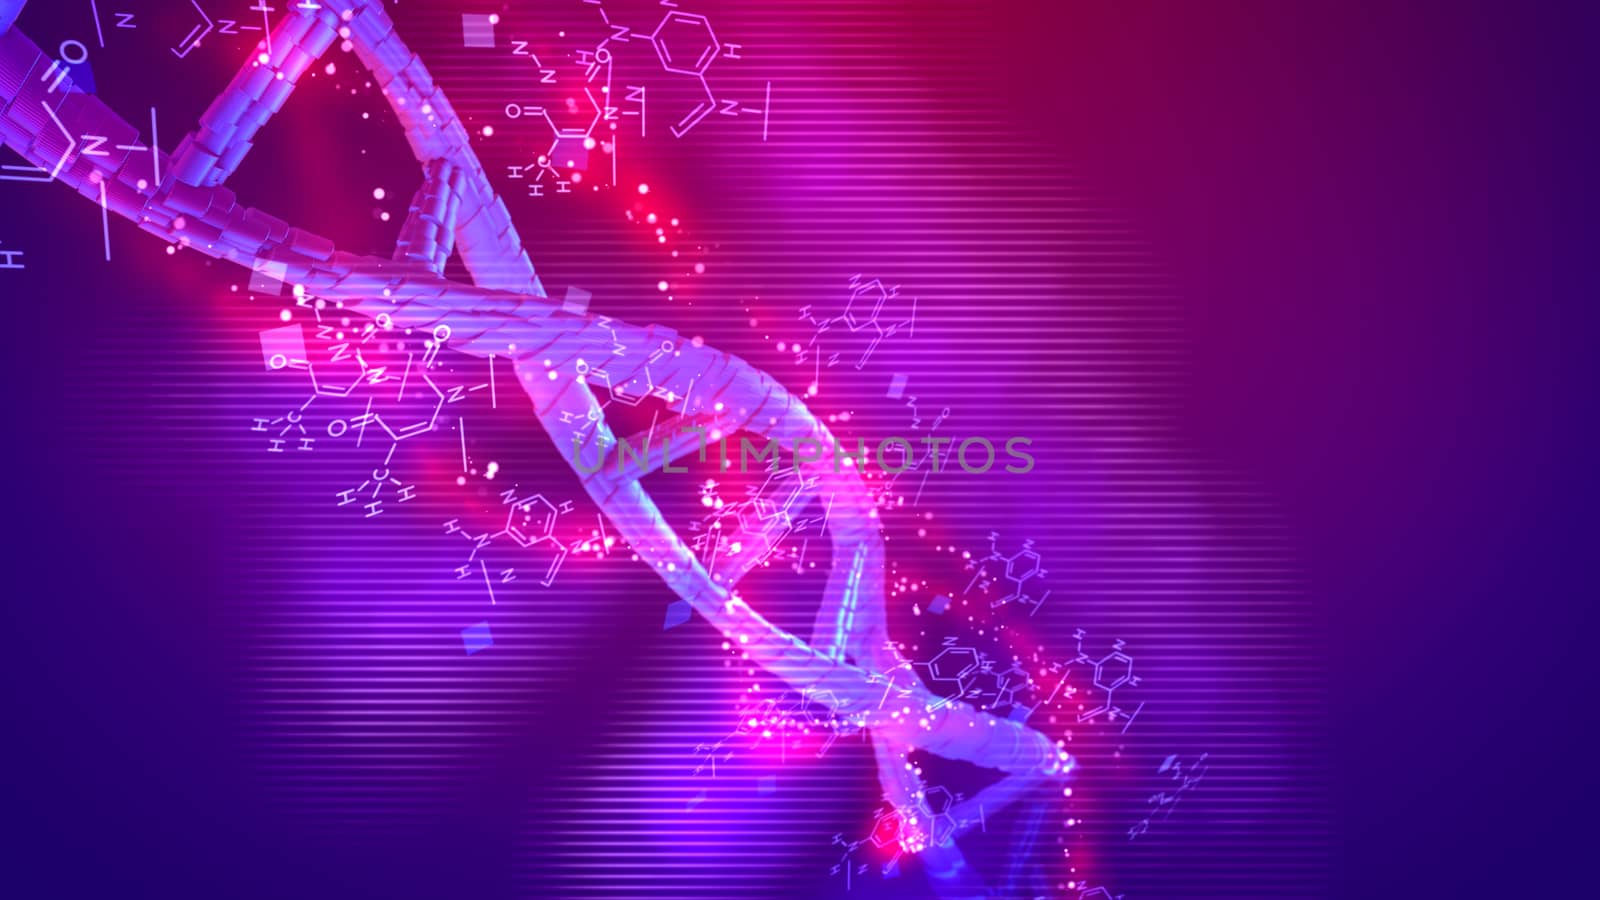 Cyberspace 3d illustration of a spiral looking DNA twisting around its shaft in the pink and purple background placed askew. Scientific formulas are rotating optimistically.